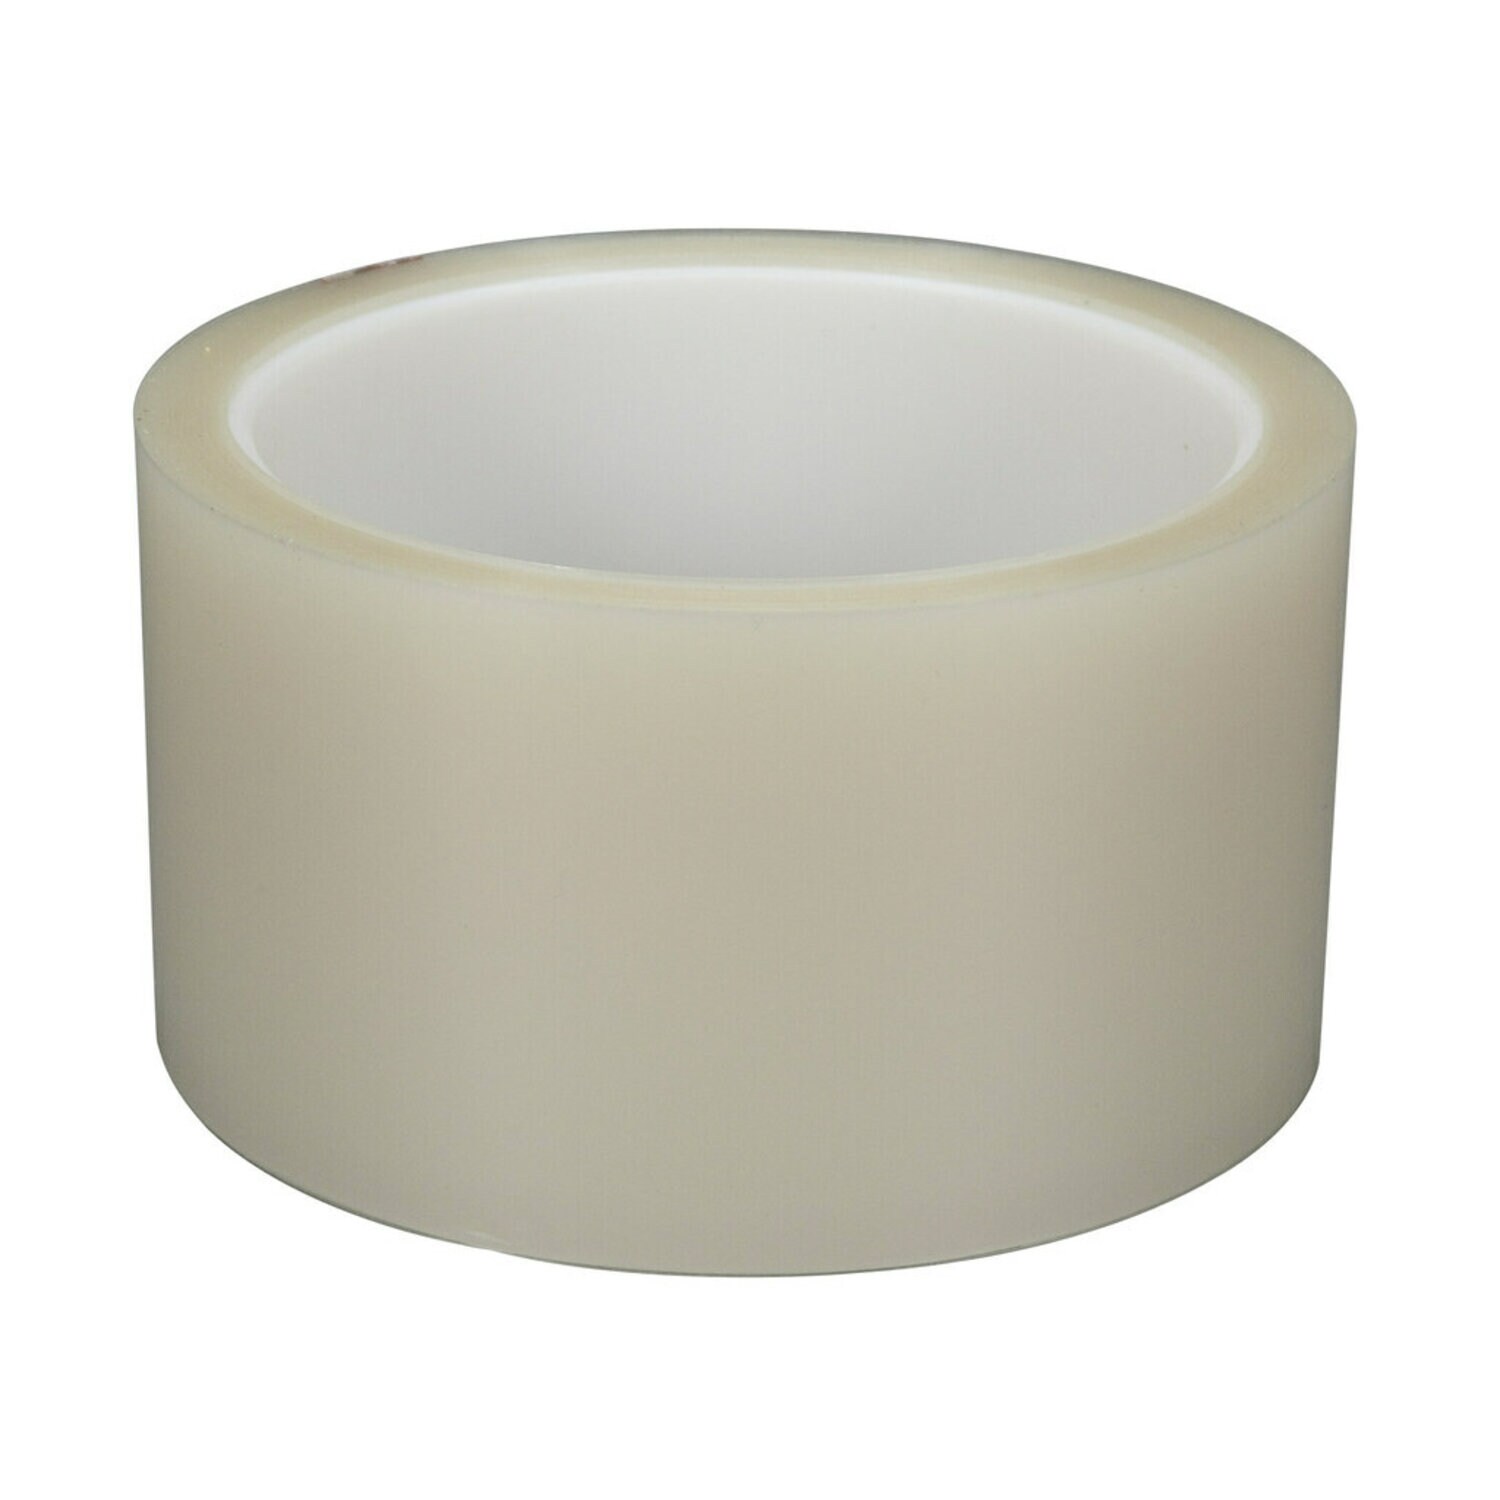 7000047527 - 3M Polyester Film Tape 853, Transparent, 3 in x 72 yd, 2.2 mil, 12
Rolls/Case